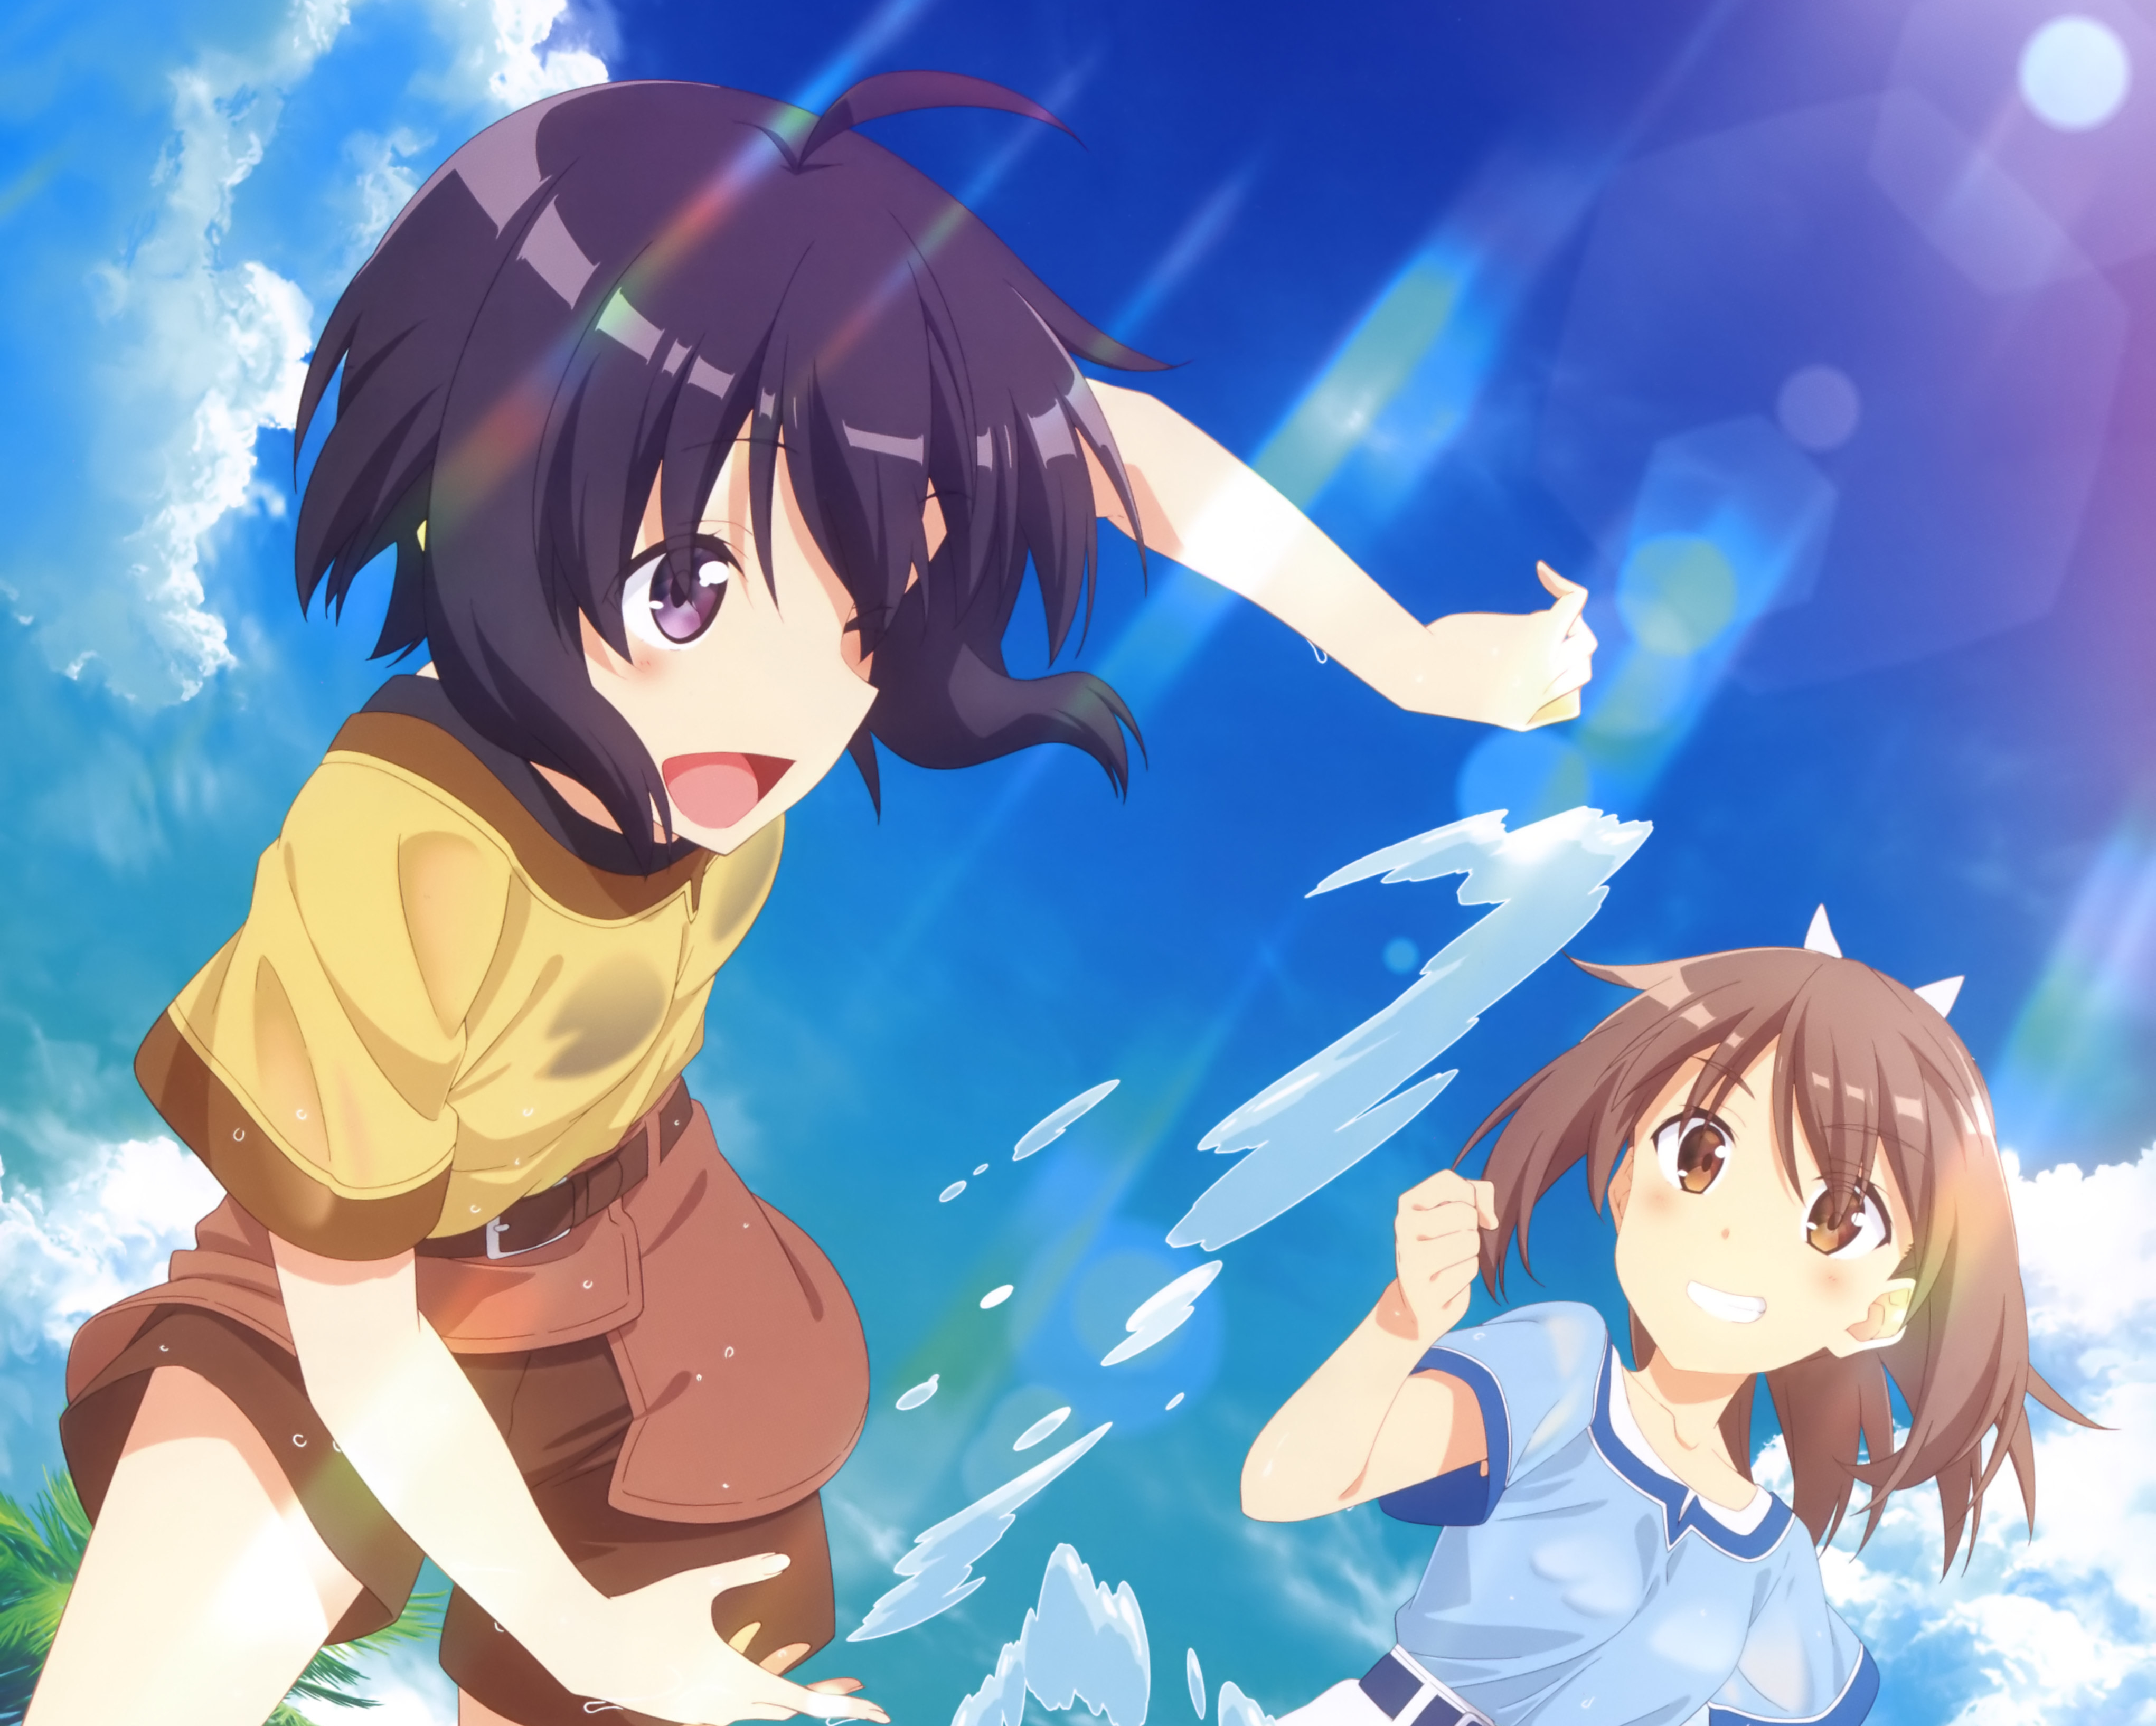 Anime Bofuri: I Don't Want to Get Hurt, so I'll Max Out My Defense. HD Wallpaper | Background Image